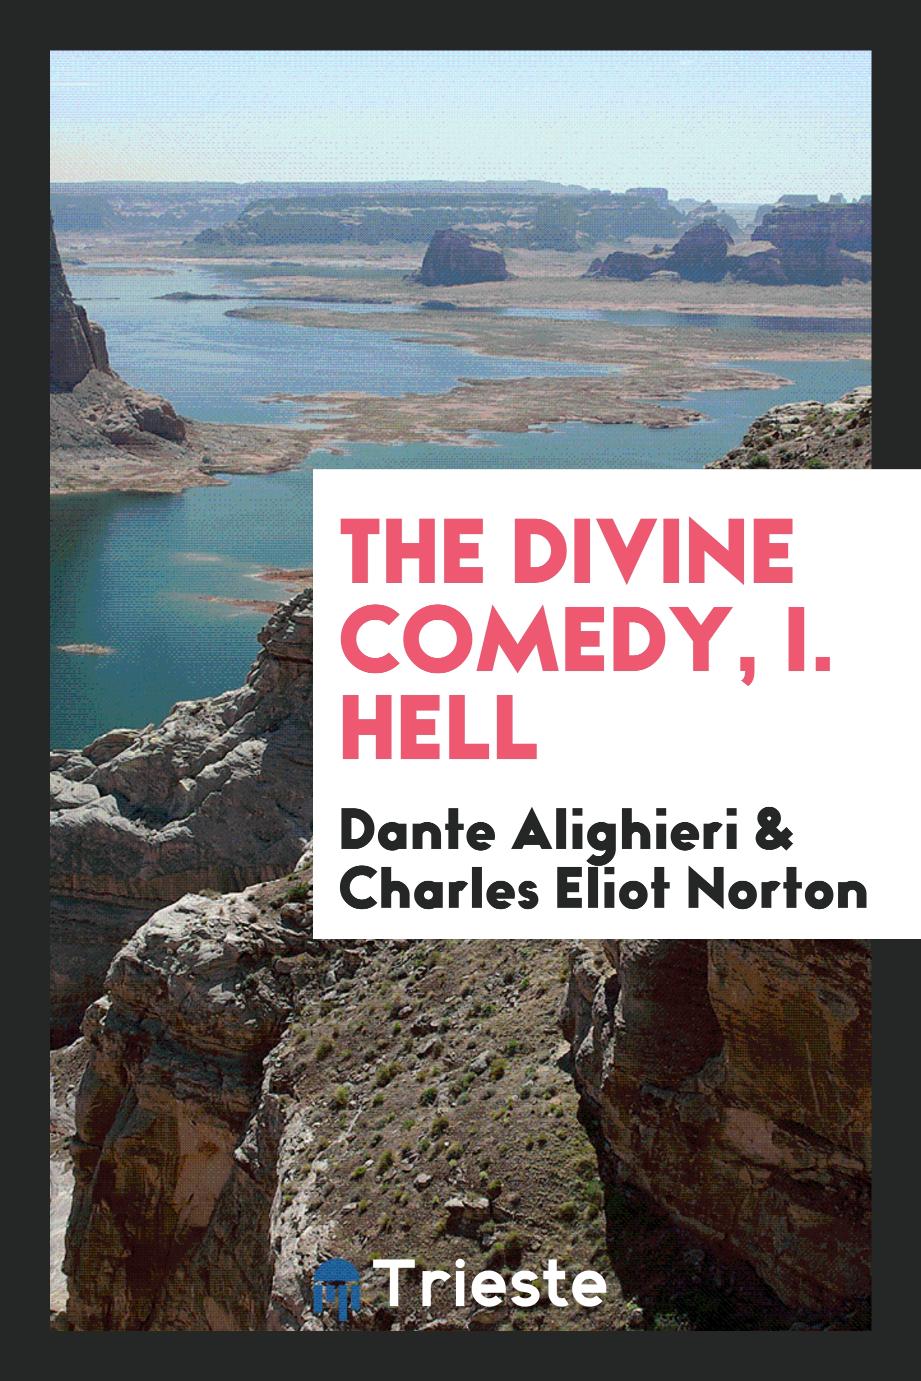 The Divine Comedy, I. Hell